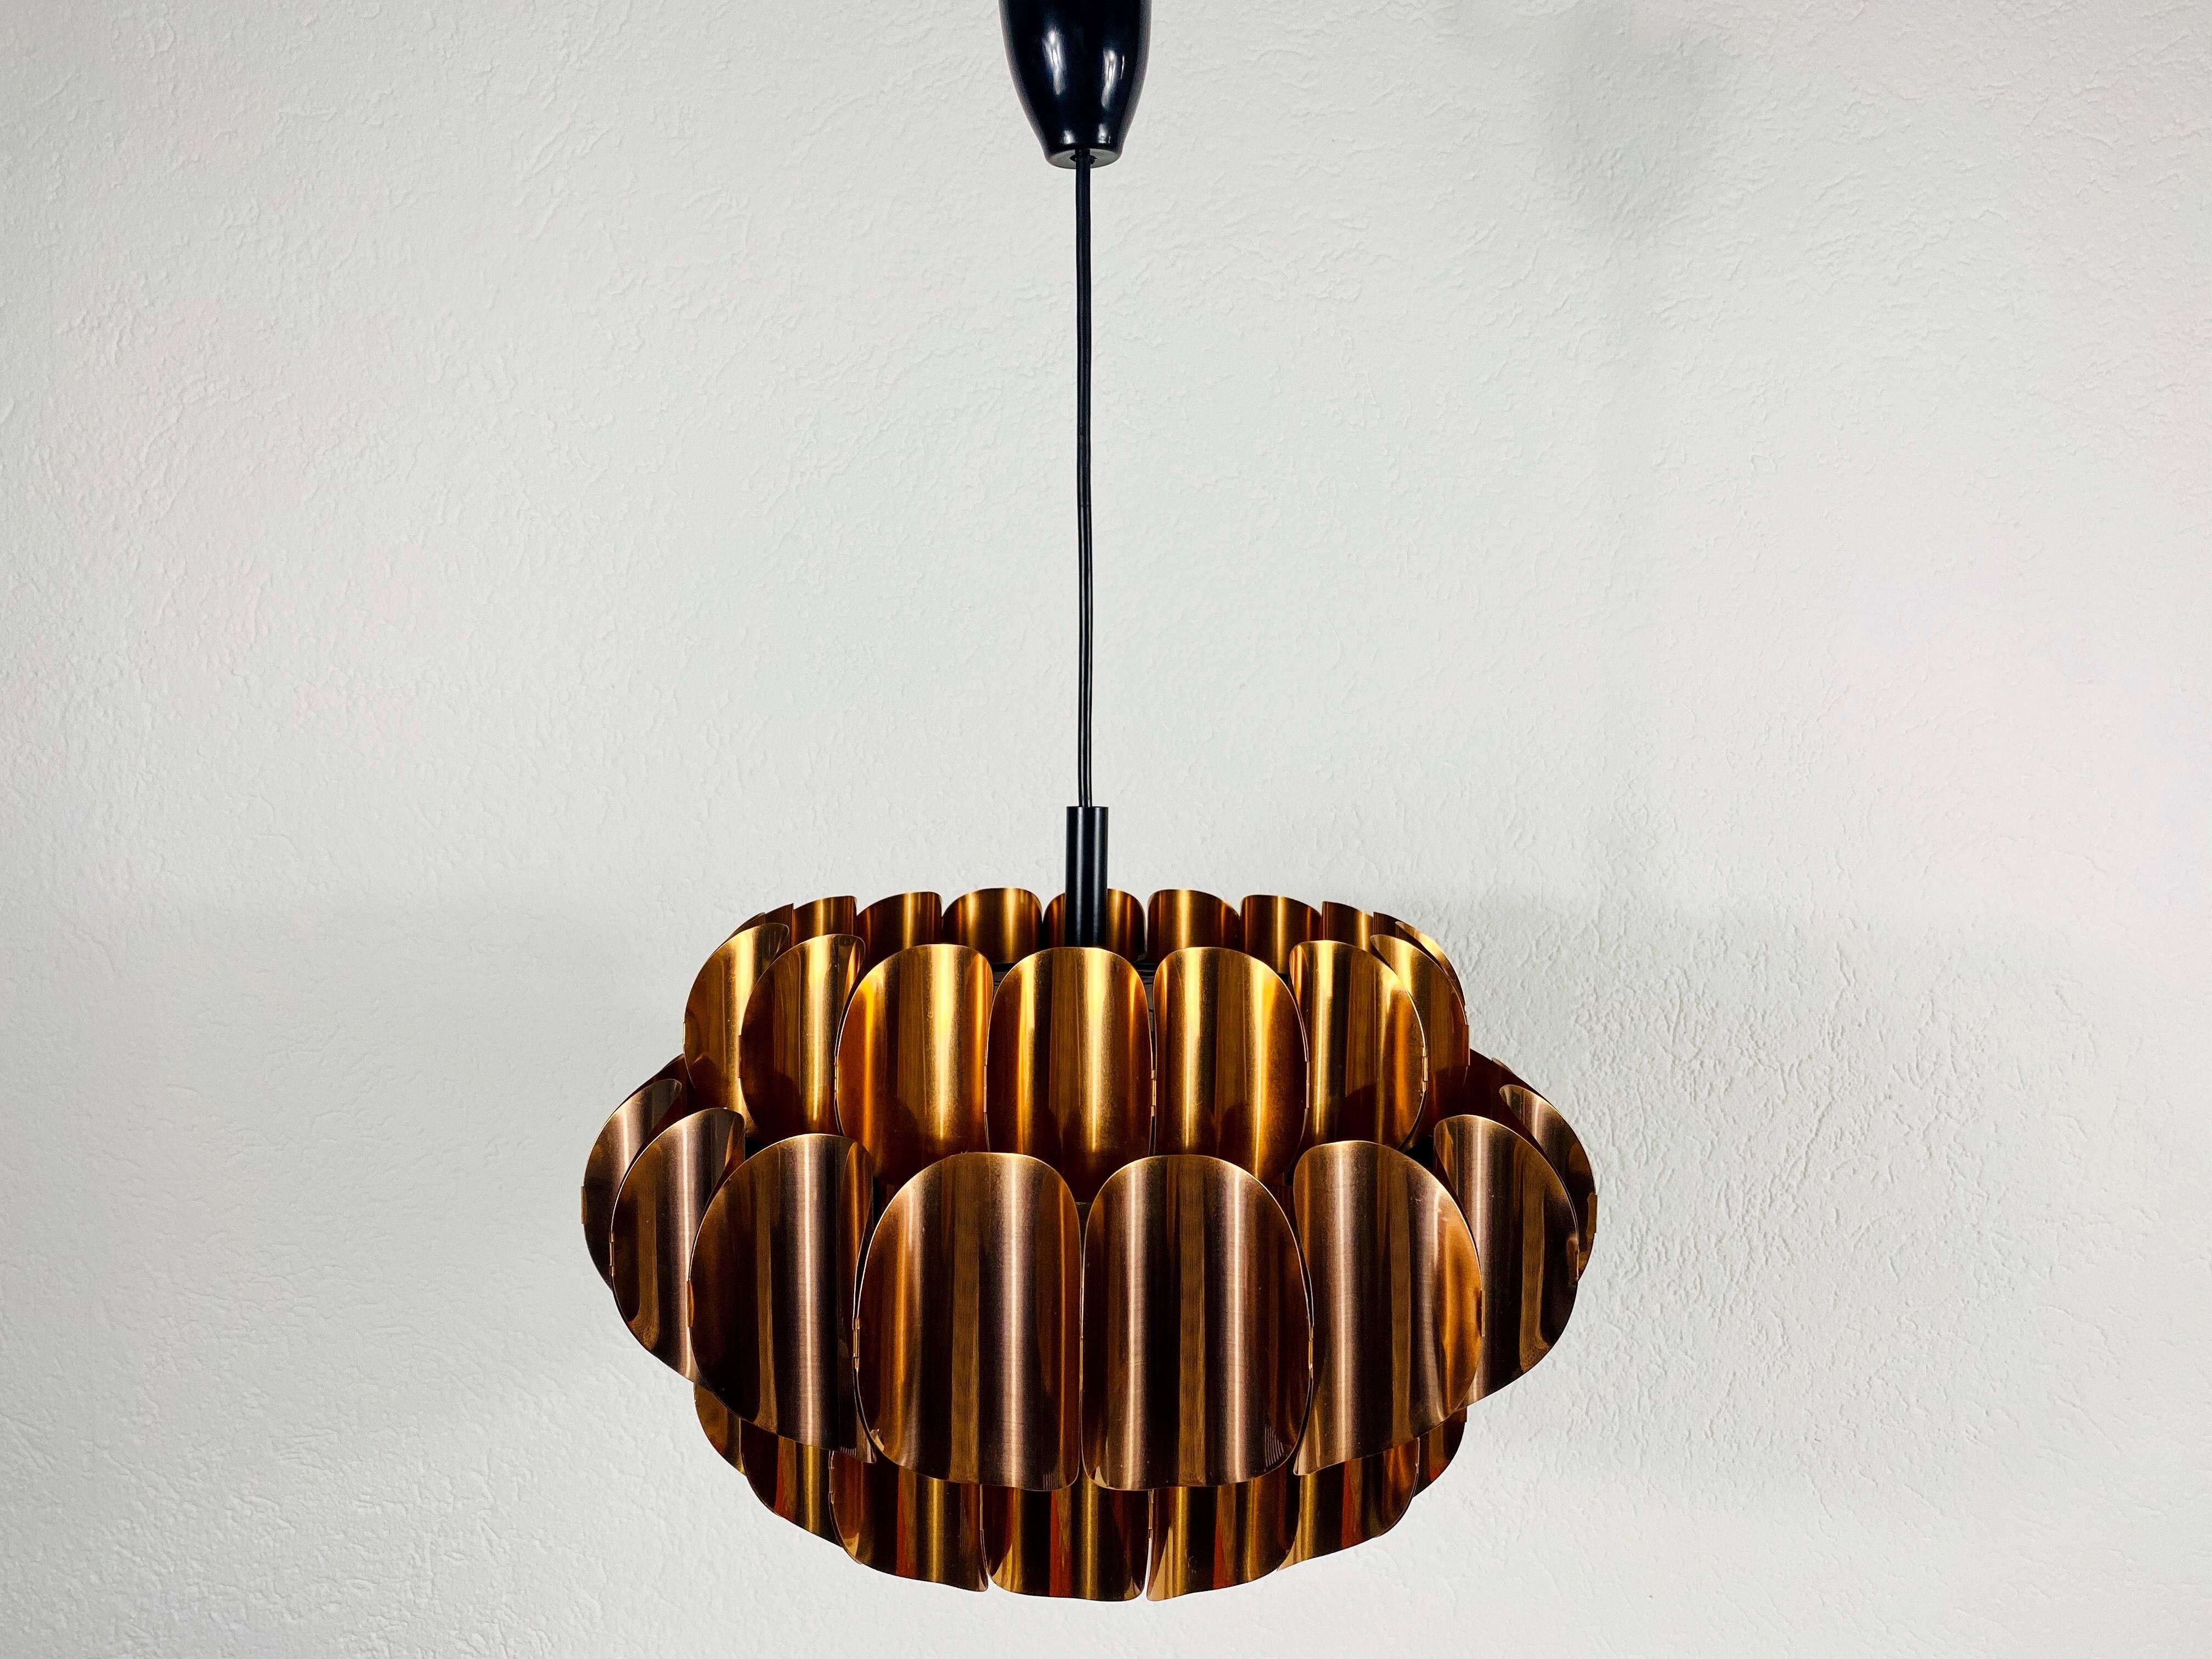 Copper pendant lamp by Temde in the 1970s.

Measures: Height of shade 26 cm

Max height 70 cm

Diameter 43 cm 


The light requires one E27 light bulb. Very good vintage condition.

Free worldwide shipping.
  